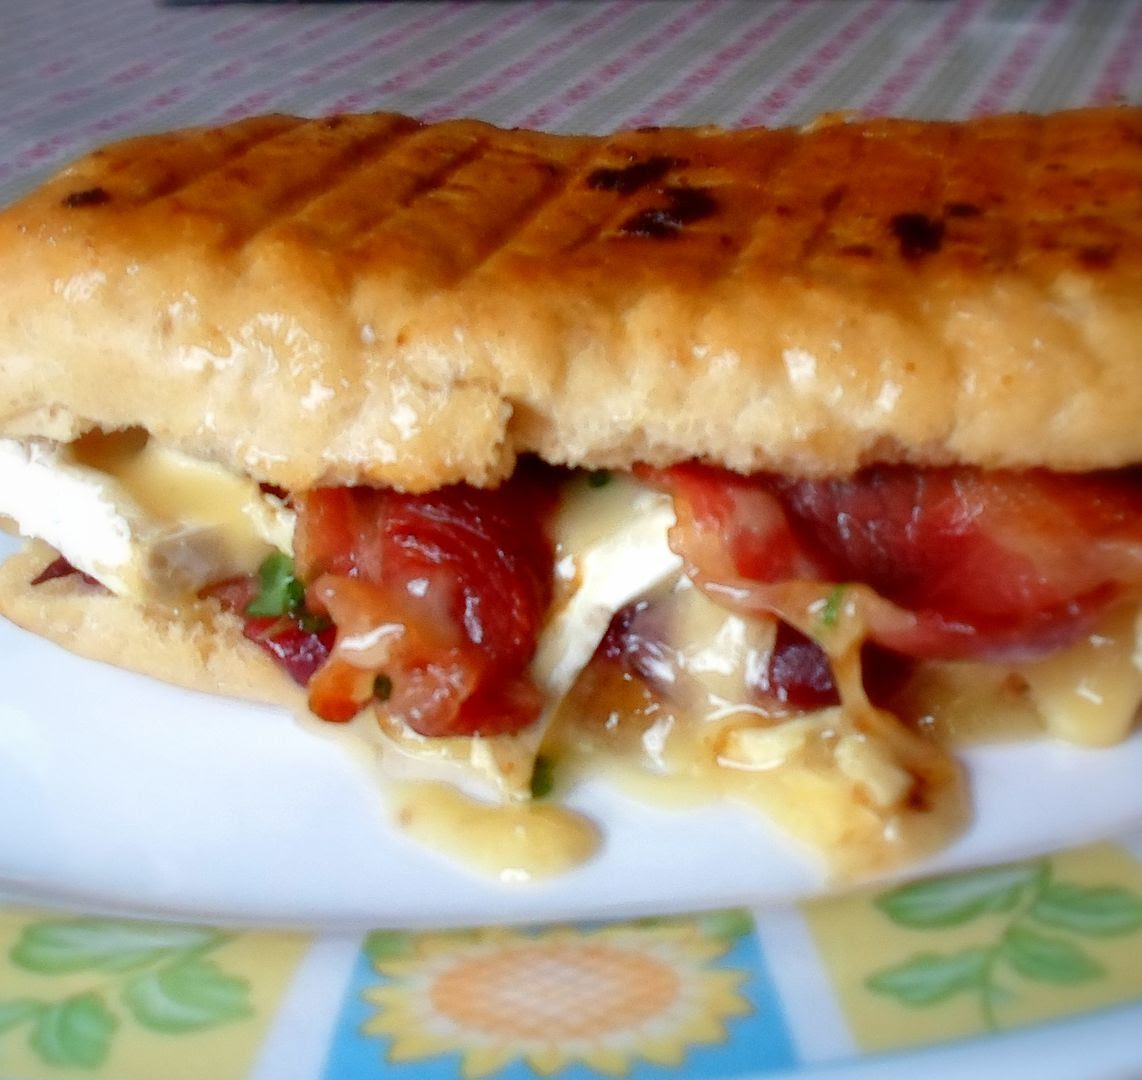 Cranberry, Bacon & Brie Panini